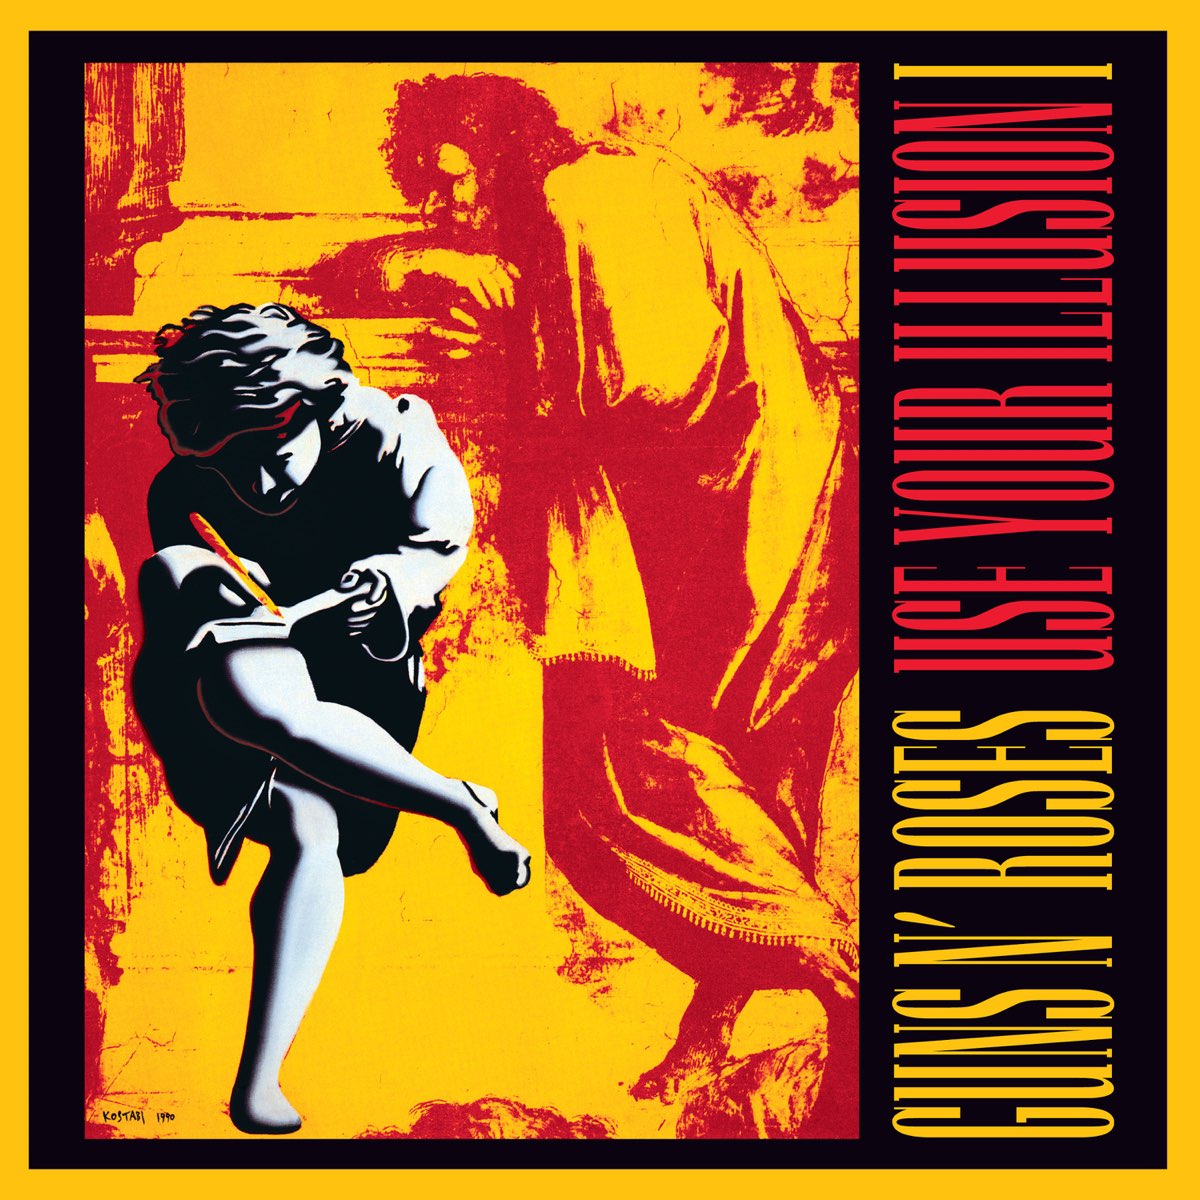 Use Your Illusion I (Deluxe Edition) by Guns N' Roses on Apple Music